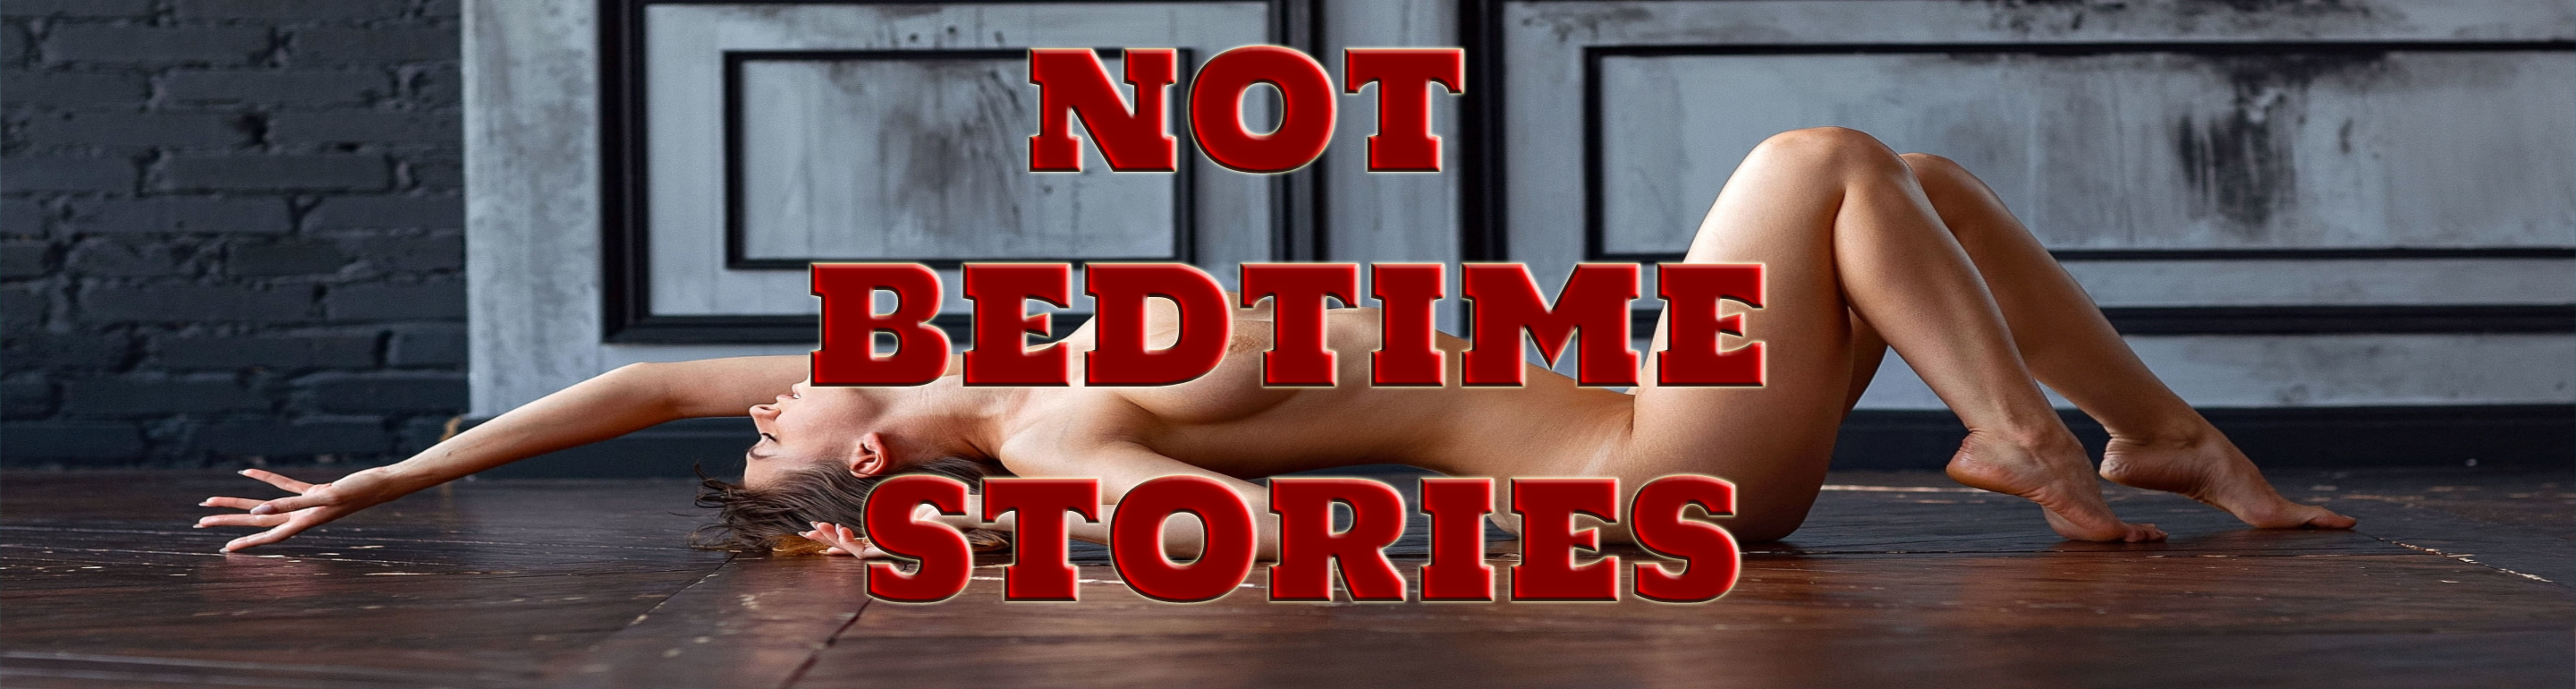 Not Bedtime Stories poster